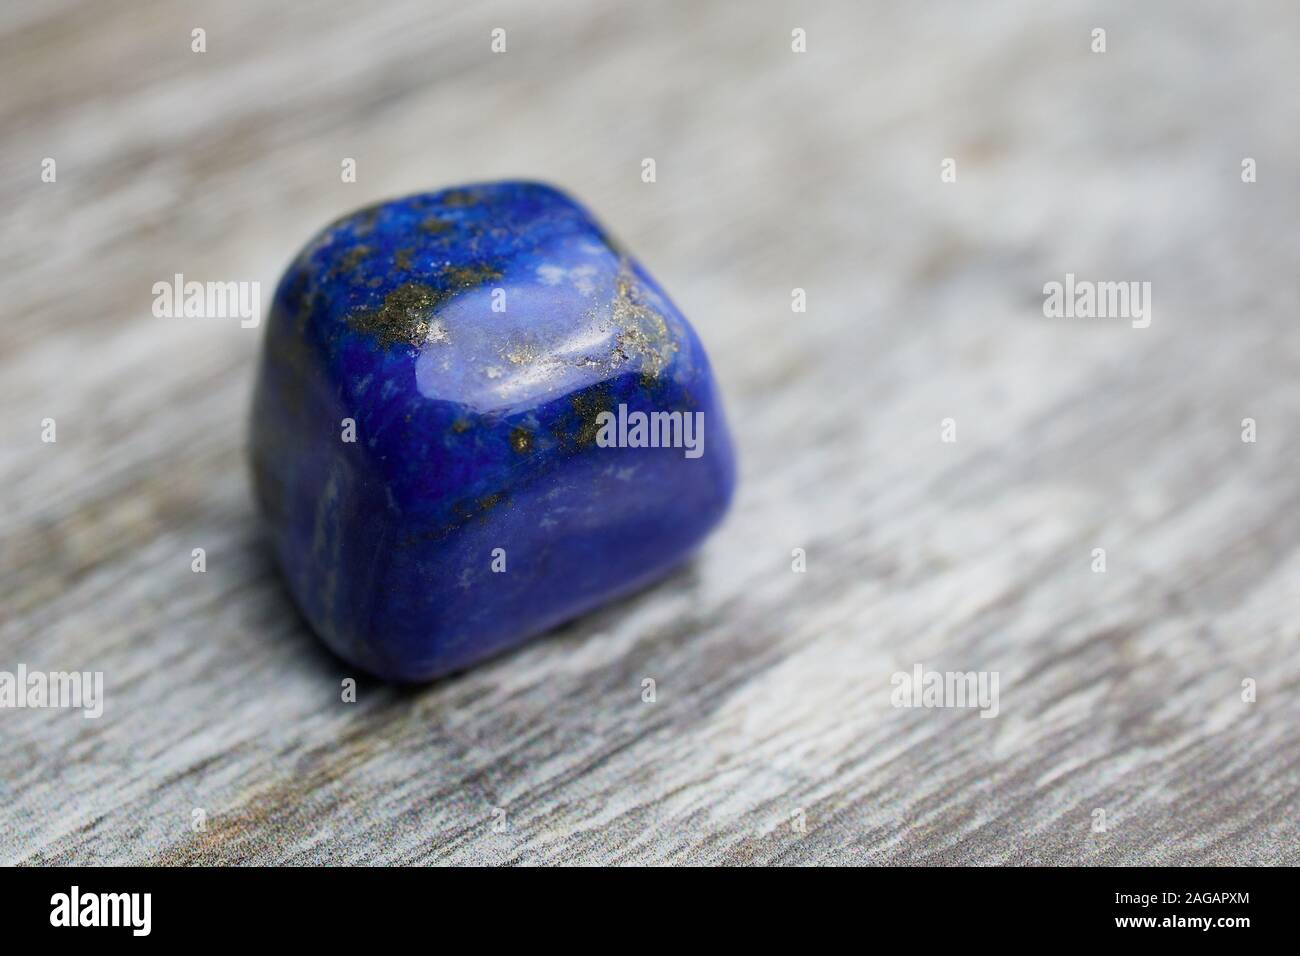 close up of blue gemstone lapis lazuli on wooden background with copy space Stock Photo